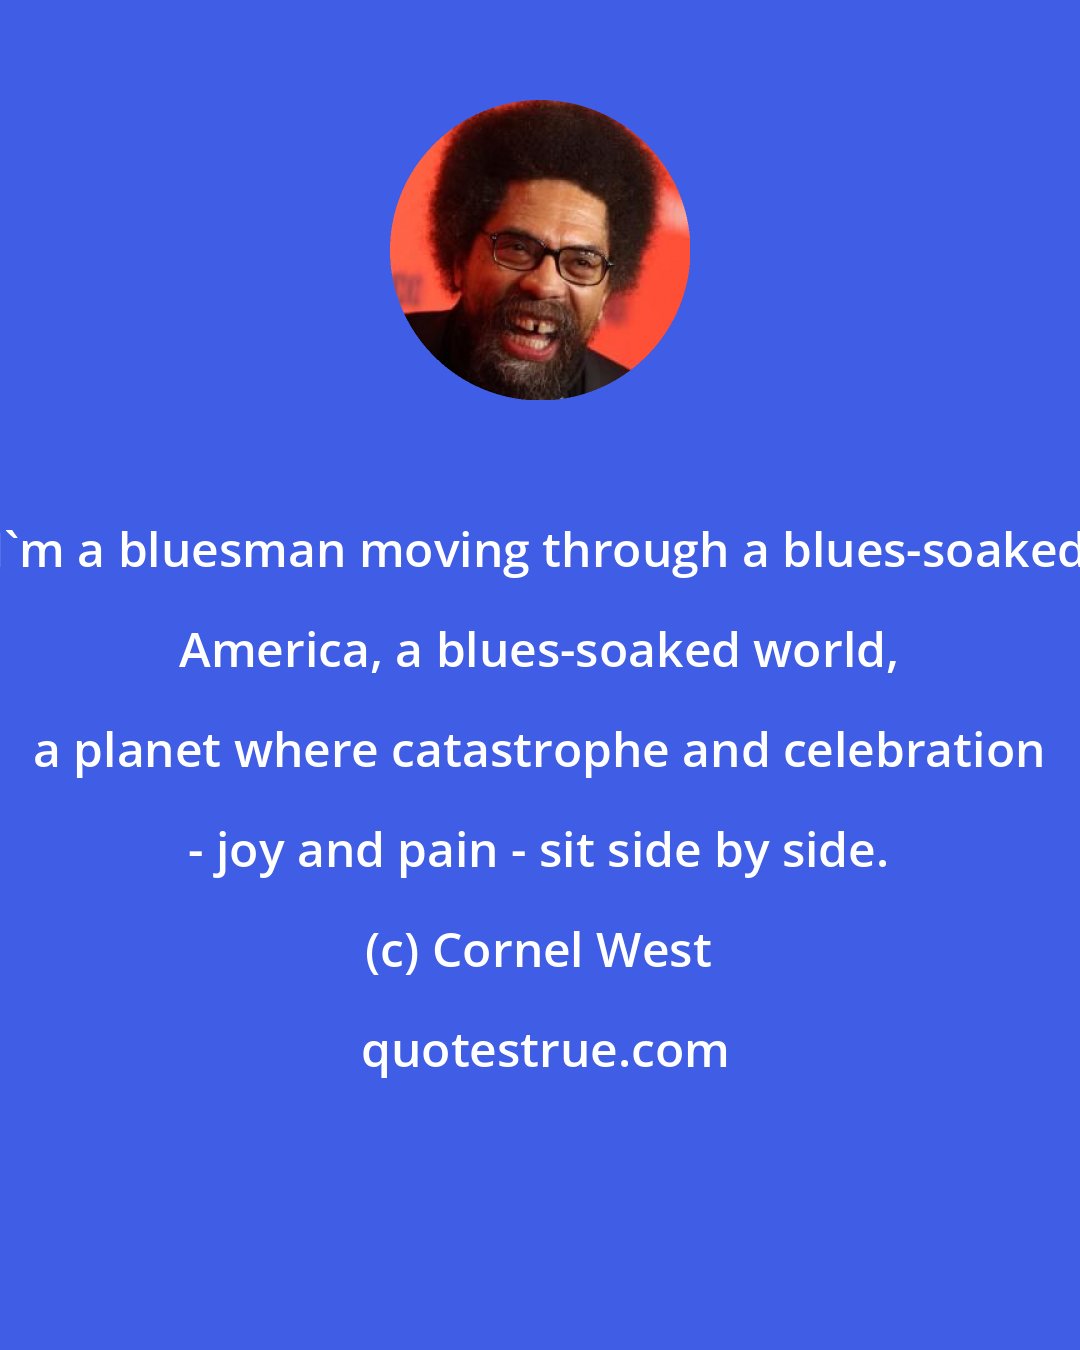 Cornel West: I'm a bluesman moving through a blues-soaked America, a blues-soaked world, a planet where catastrophe and celebration - joy and pain - sit side by side.